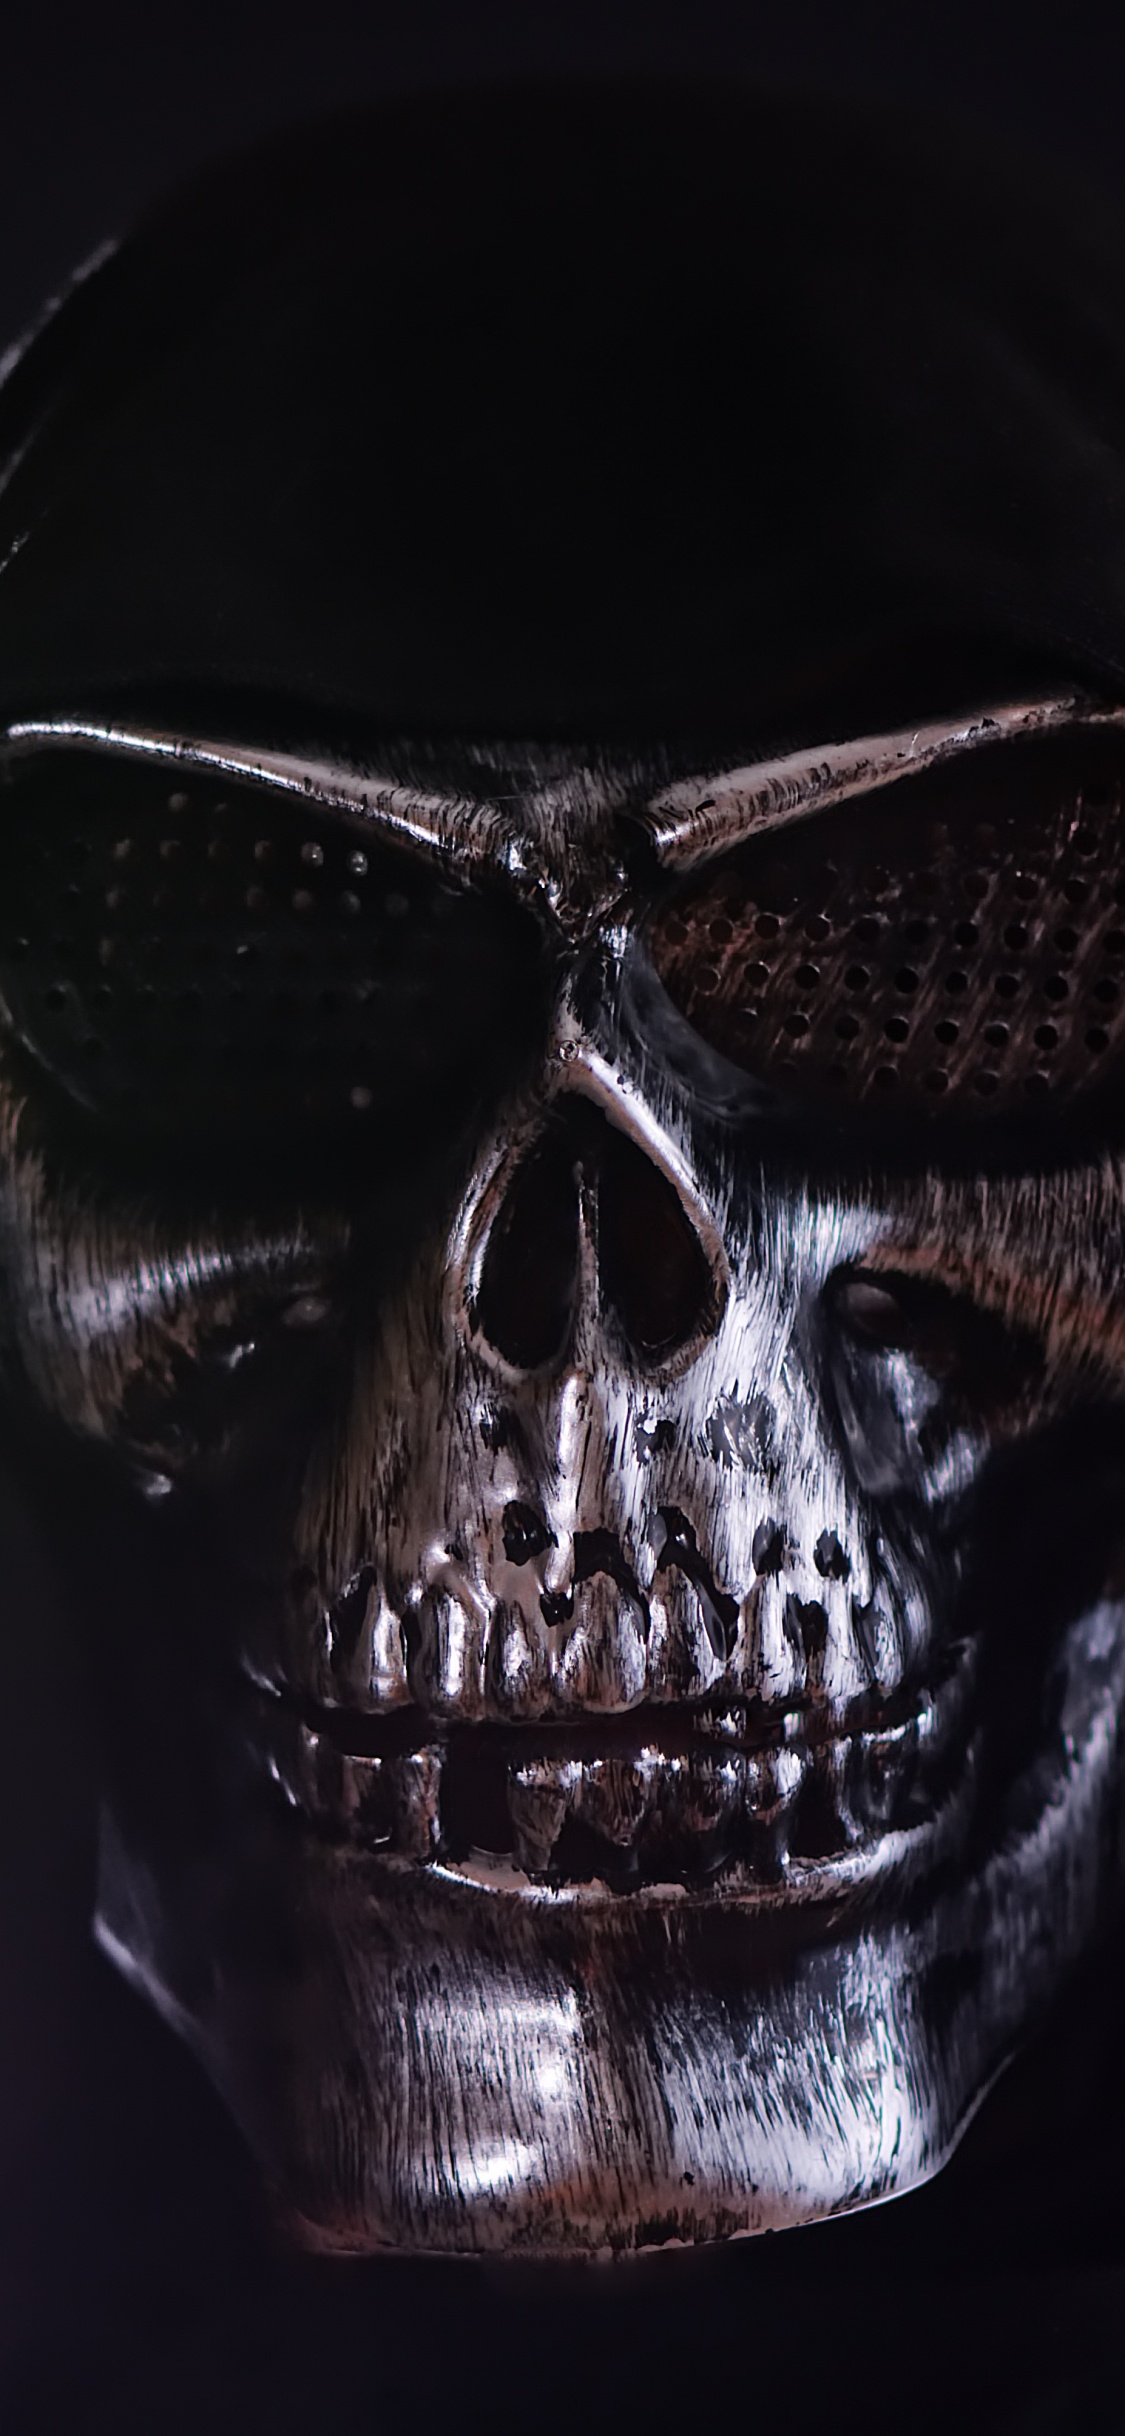 Black and Silver Skull Mask. Wallpaper in 1125x2436 Resolution